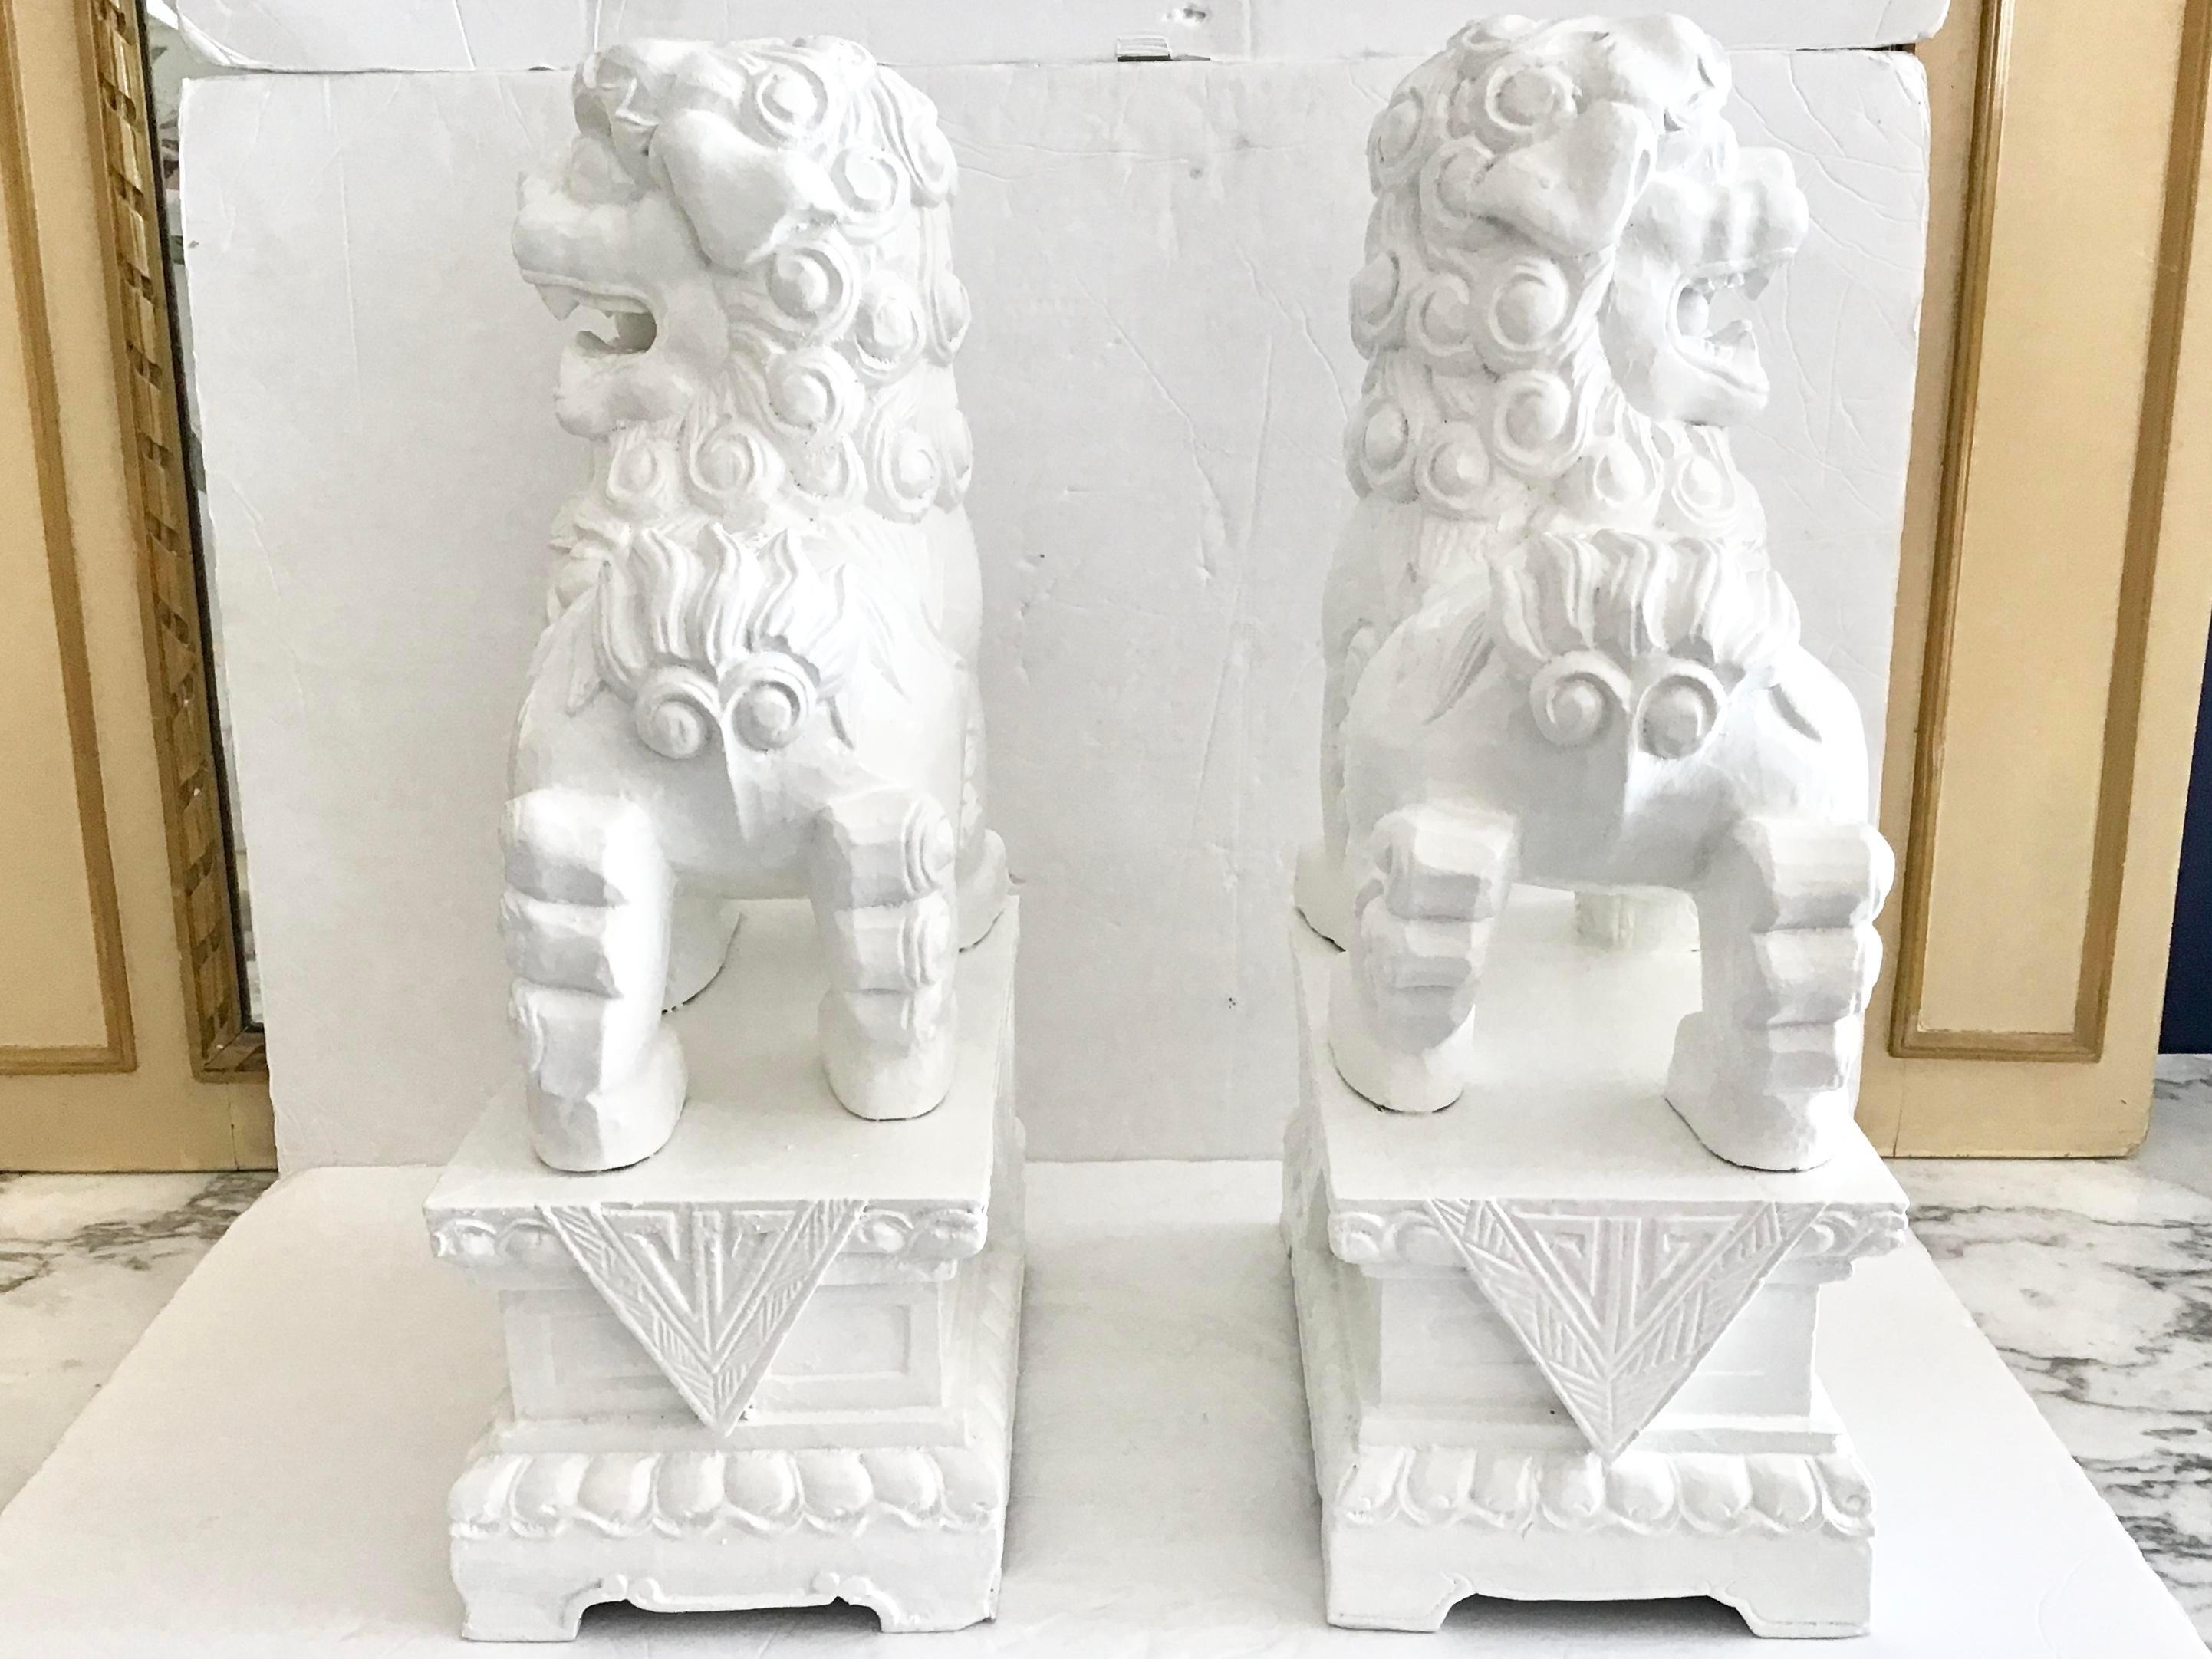 Chinoiserie White Foo Dogs Carved in Wood Base Geometrical Figures, a Pair For Sale